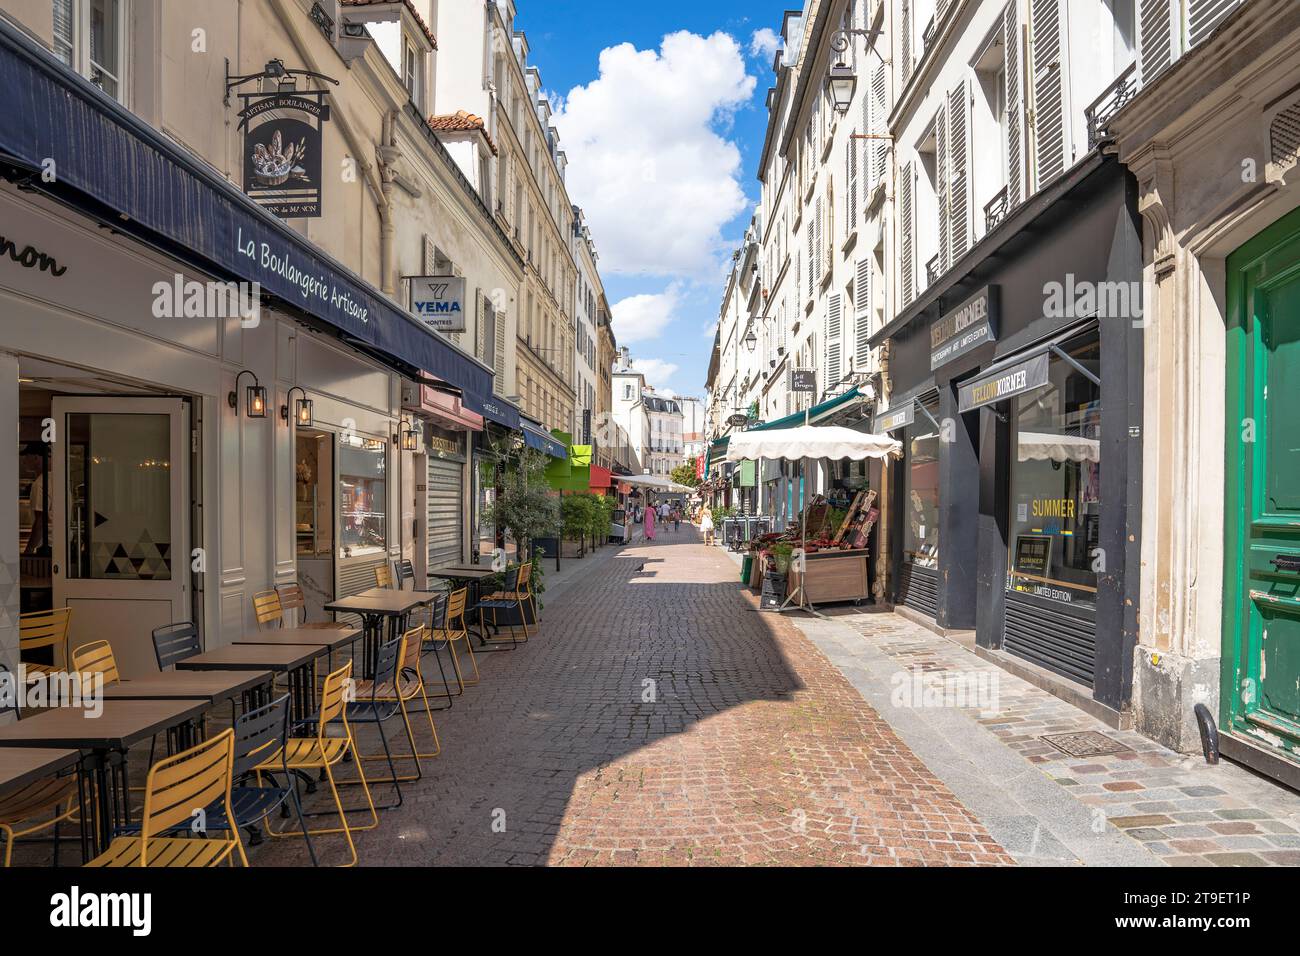 A pedestrian section of Rue de l'Annonciation with shops and stalls, in the Passy neighborhood, 16th arrondissement, Paris, France. Stock Photo